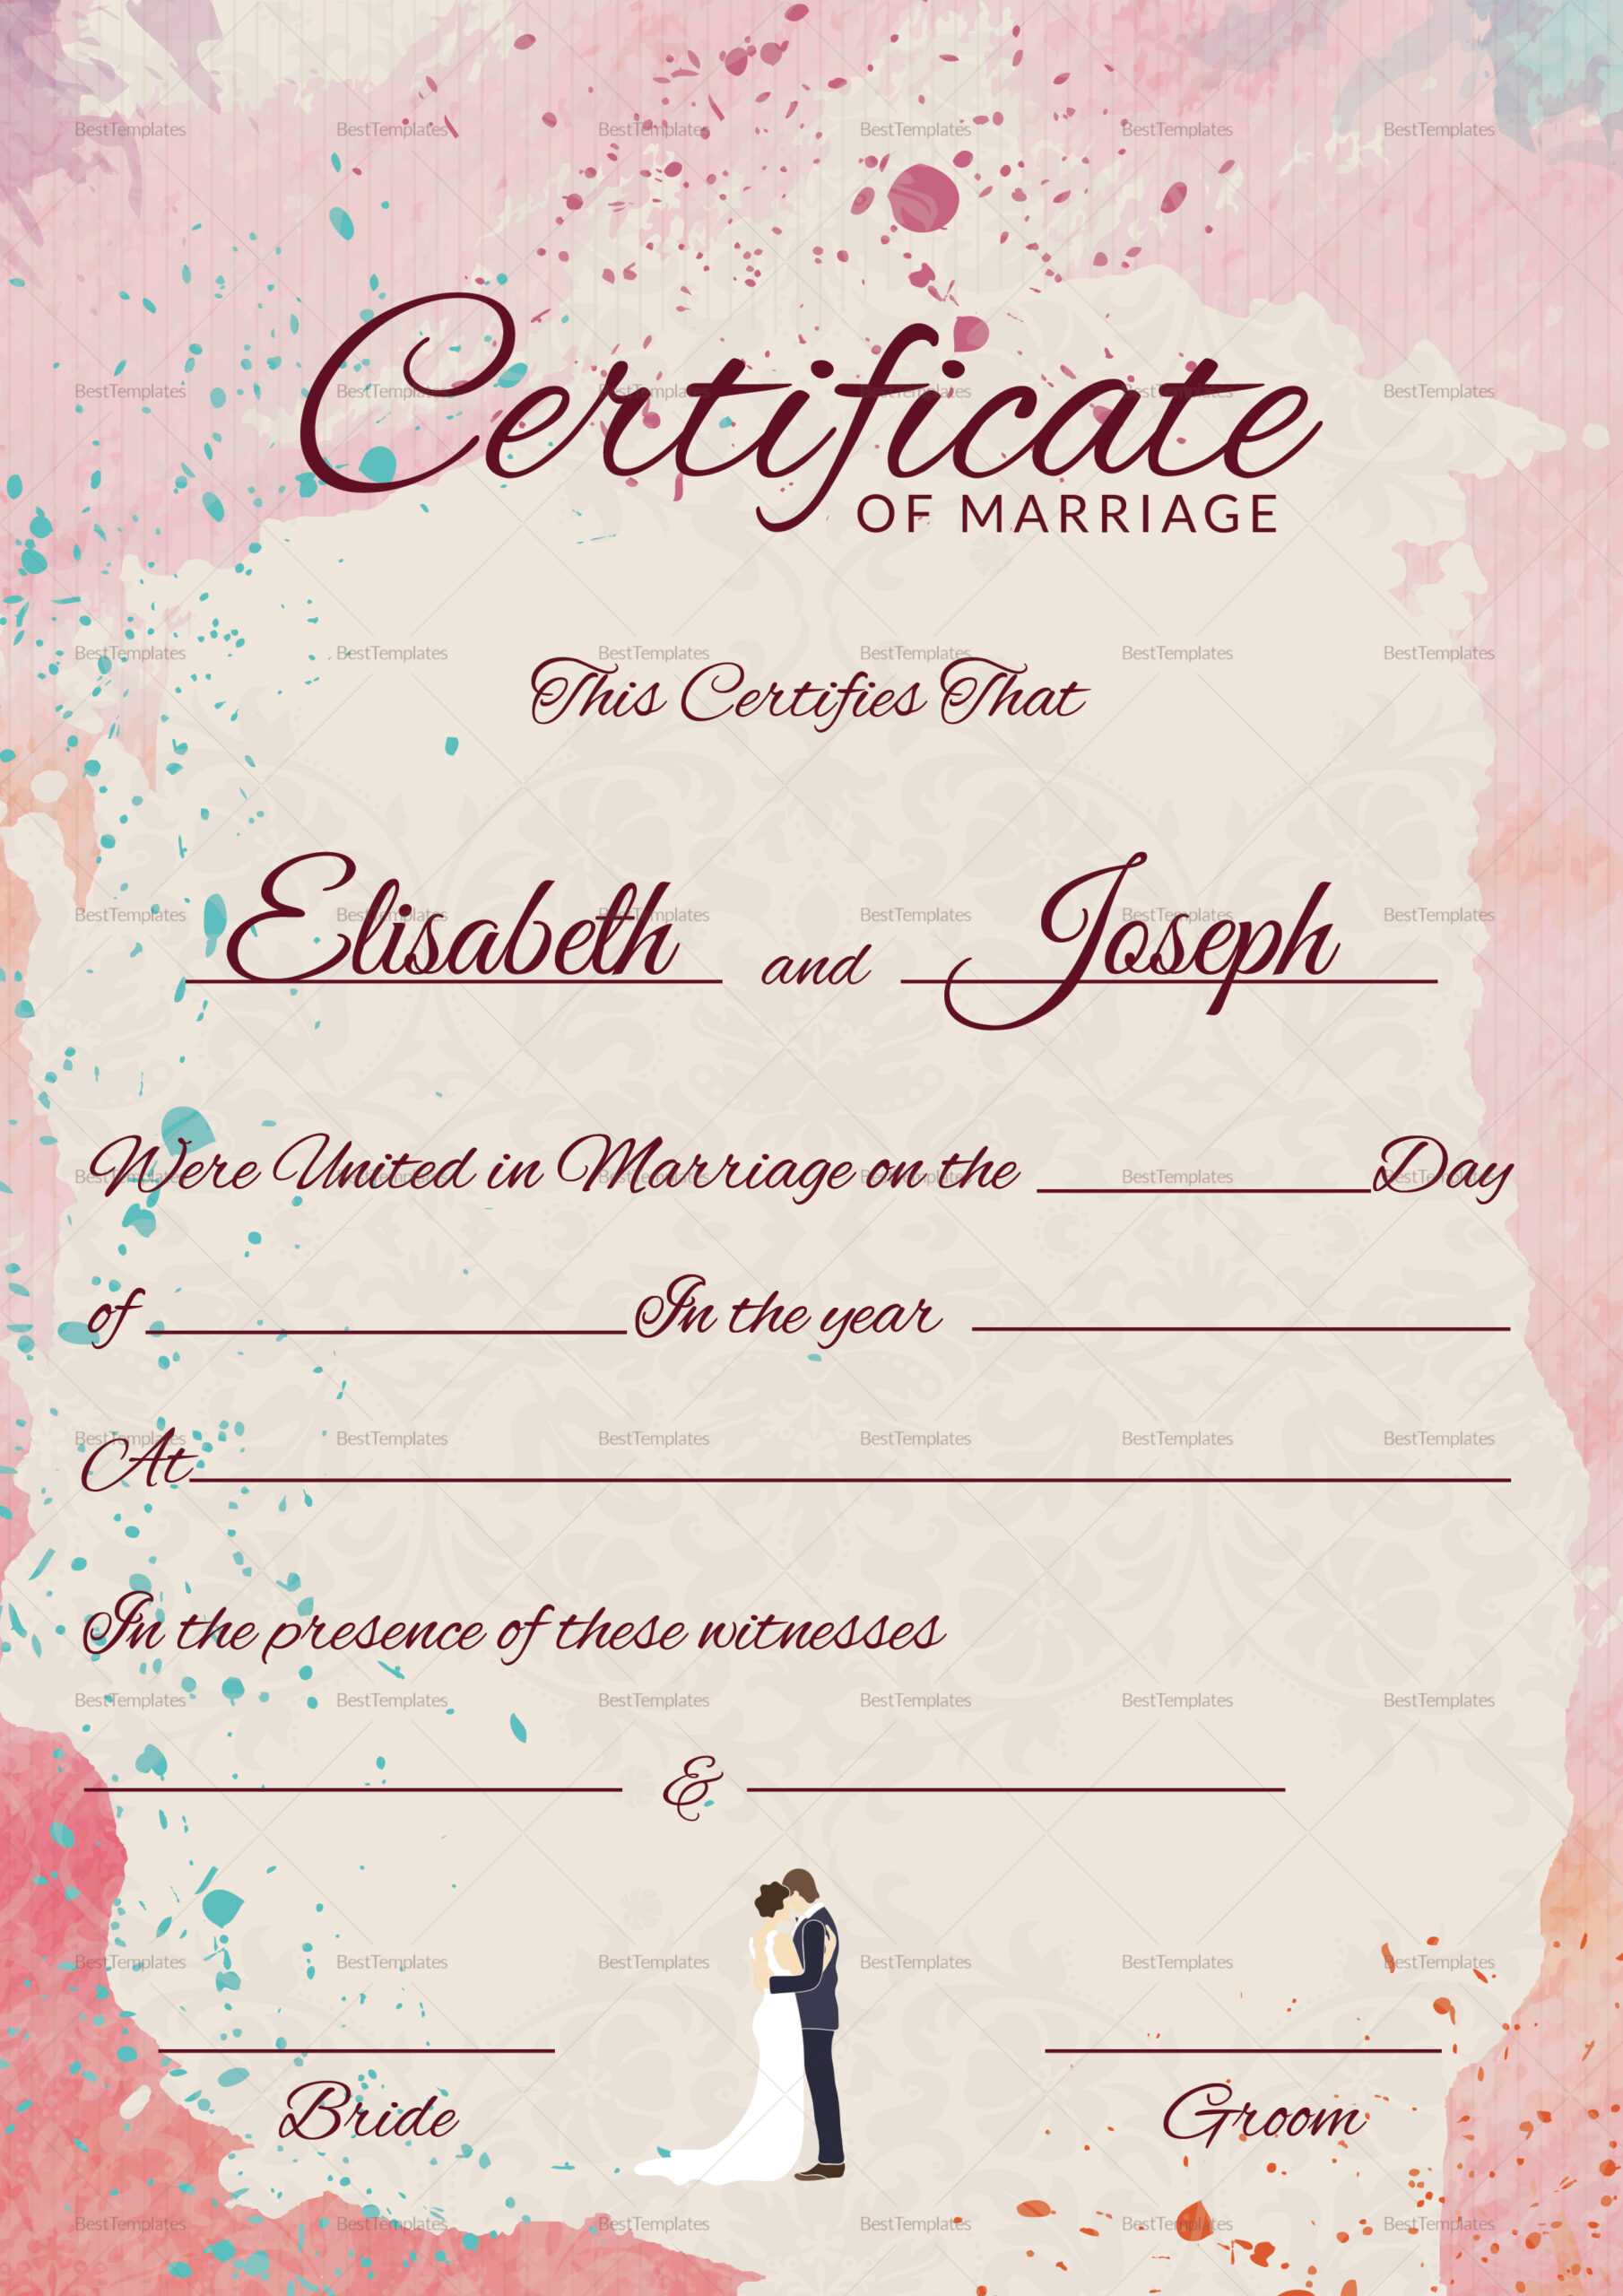 Christian Marriage Certificate Template In Certificate Of Marriage Template